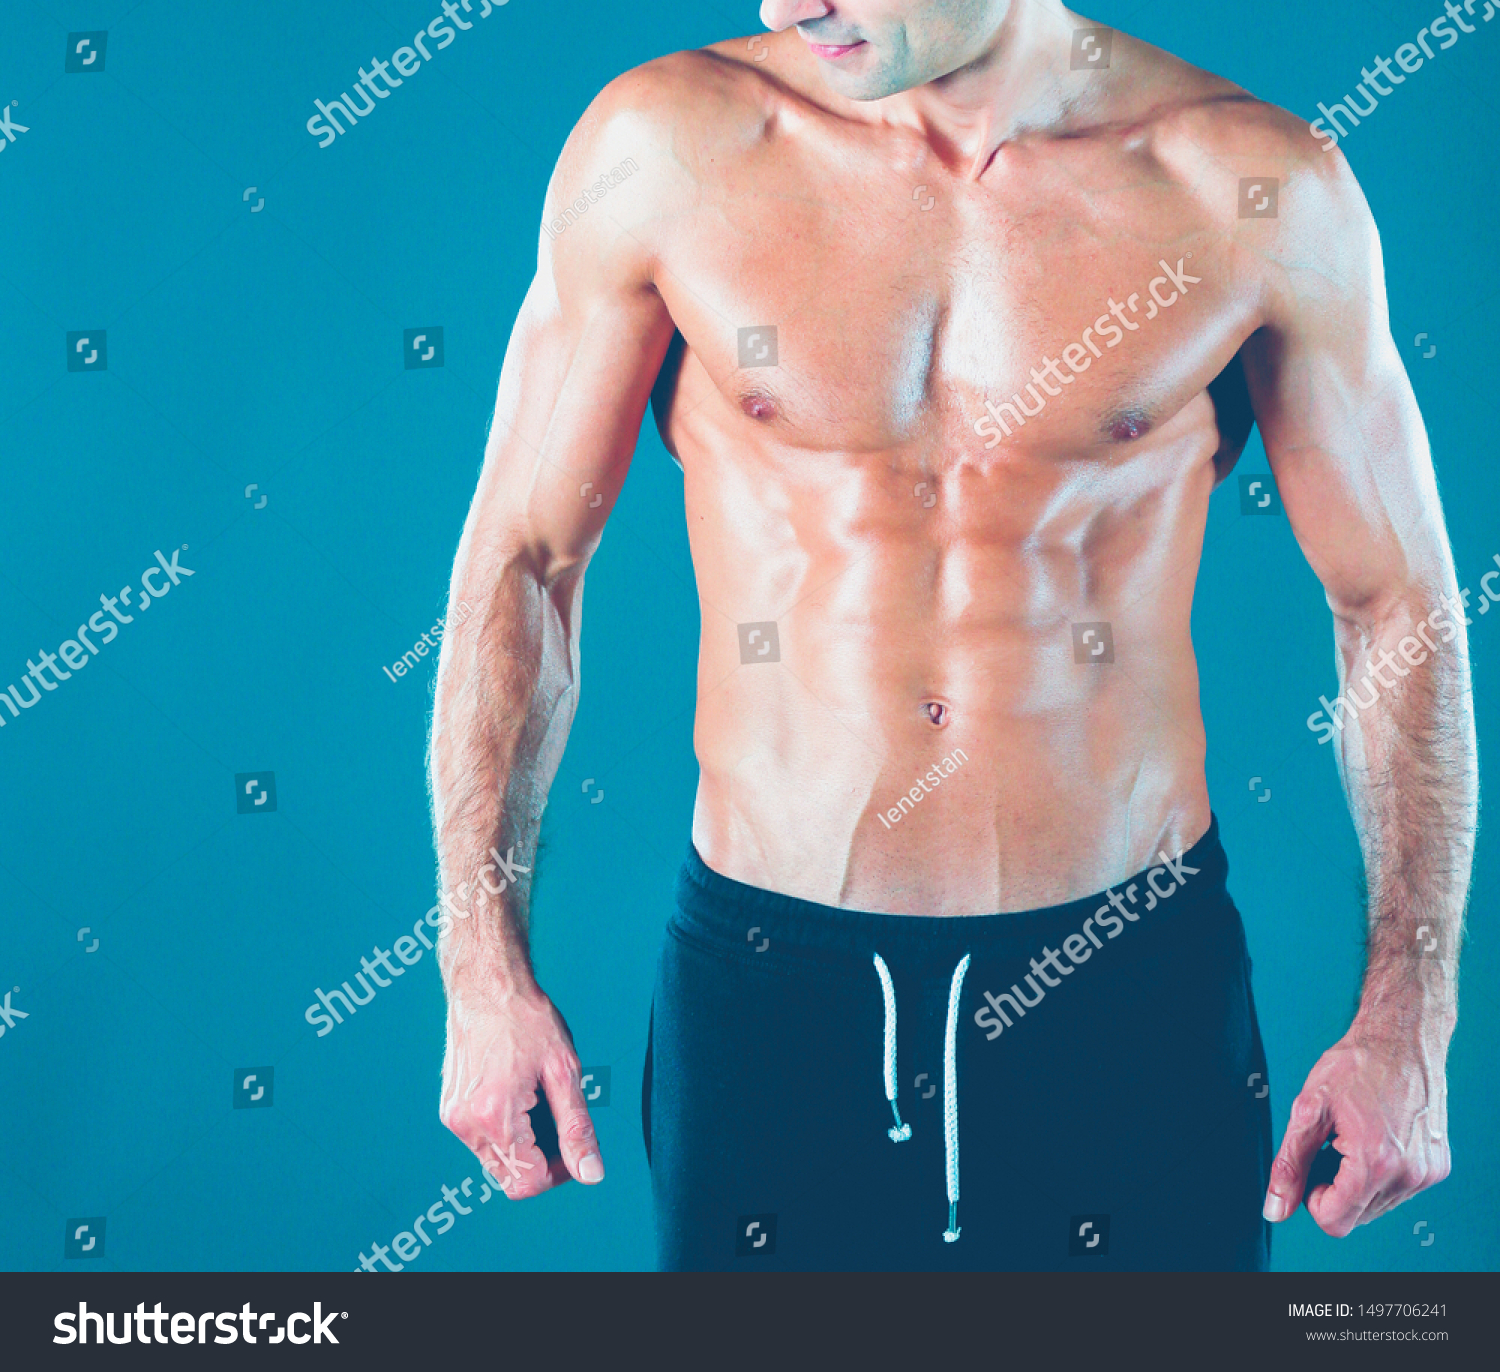 muscular man. Muscular man on a grey background showing muscles. Fitness instructor. Fitness professional. Workout. Men's fitness. #1497706241